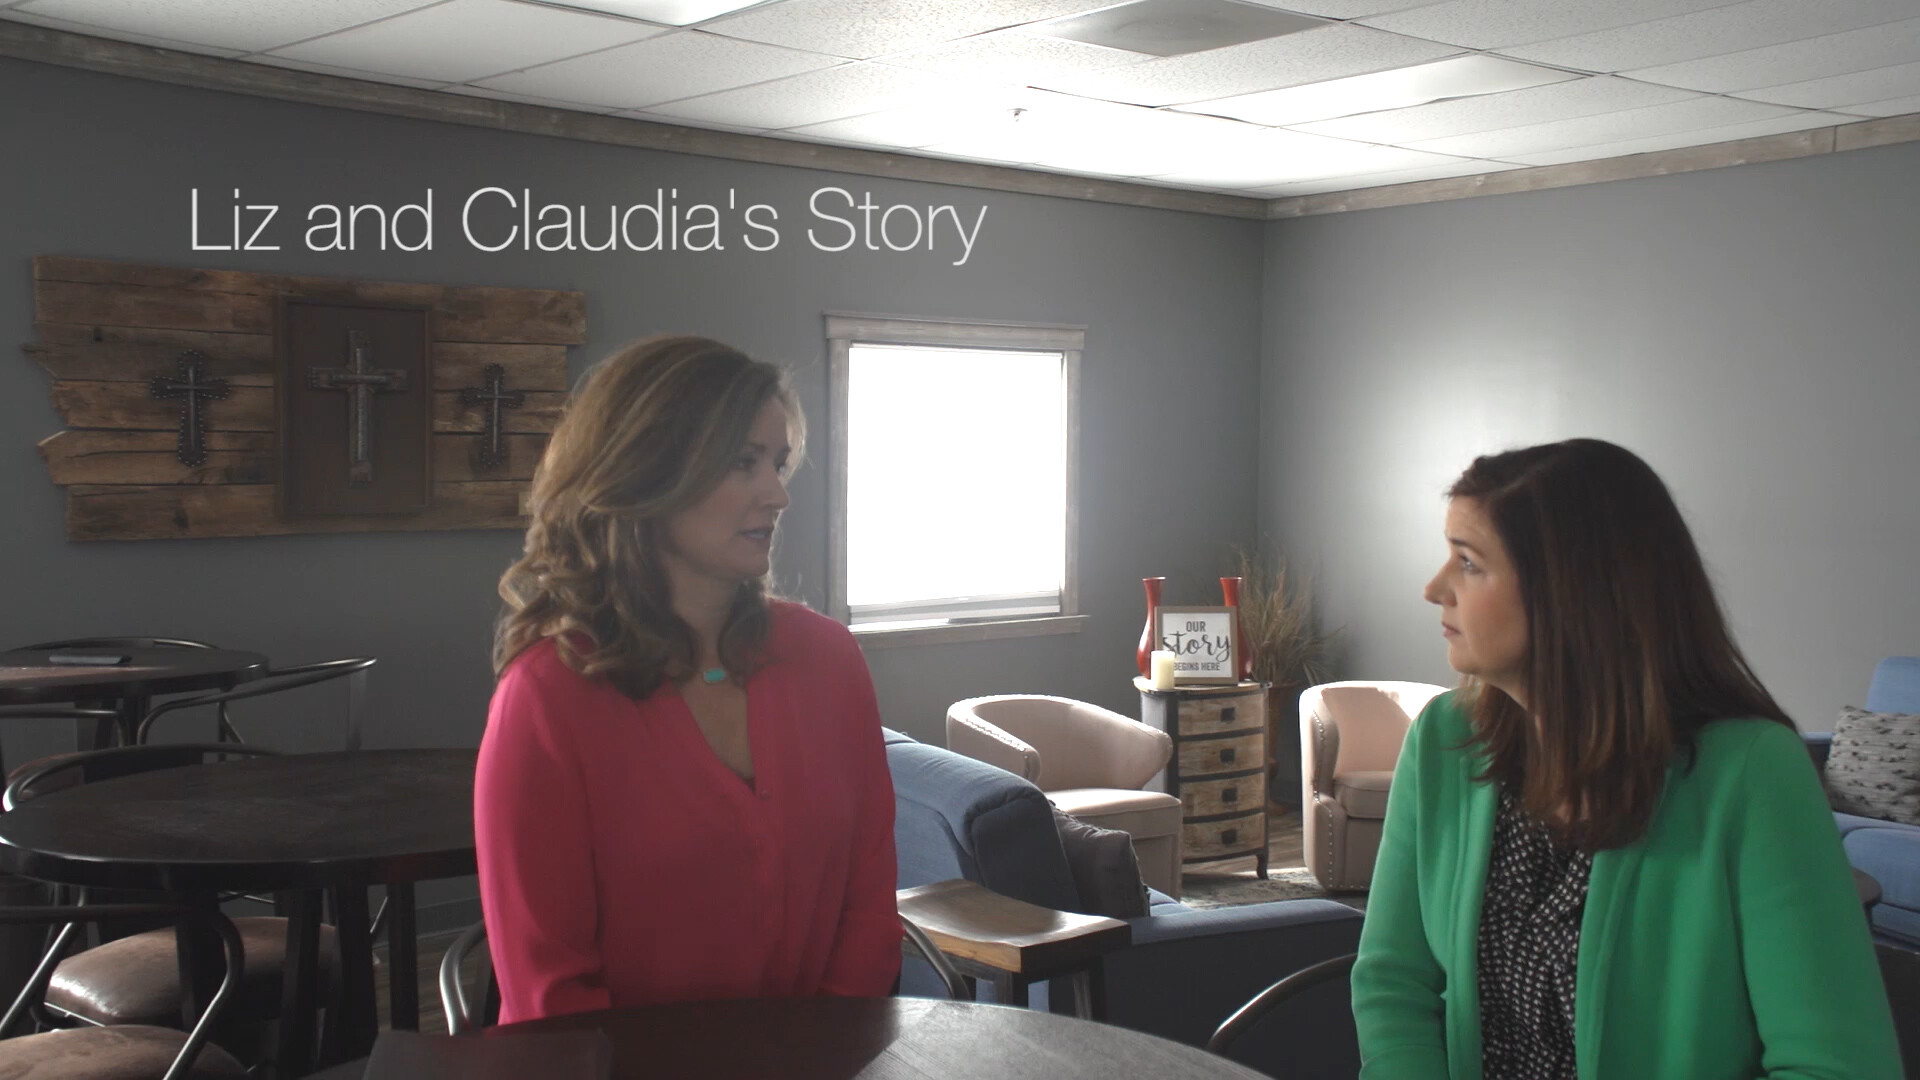 Liz and Claudia's Story